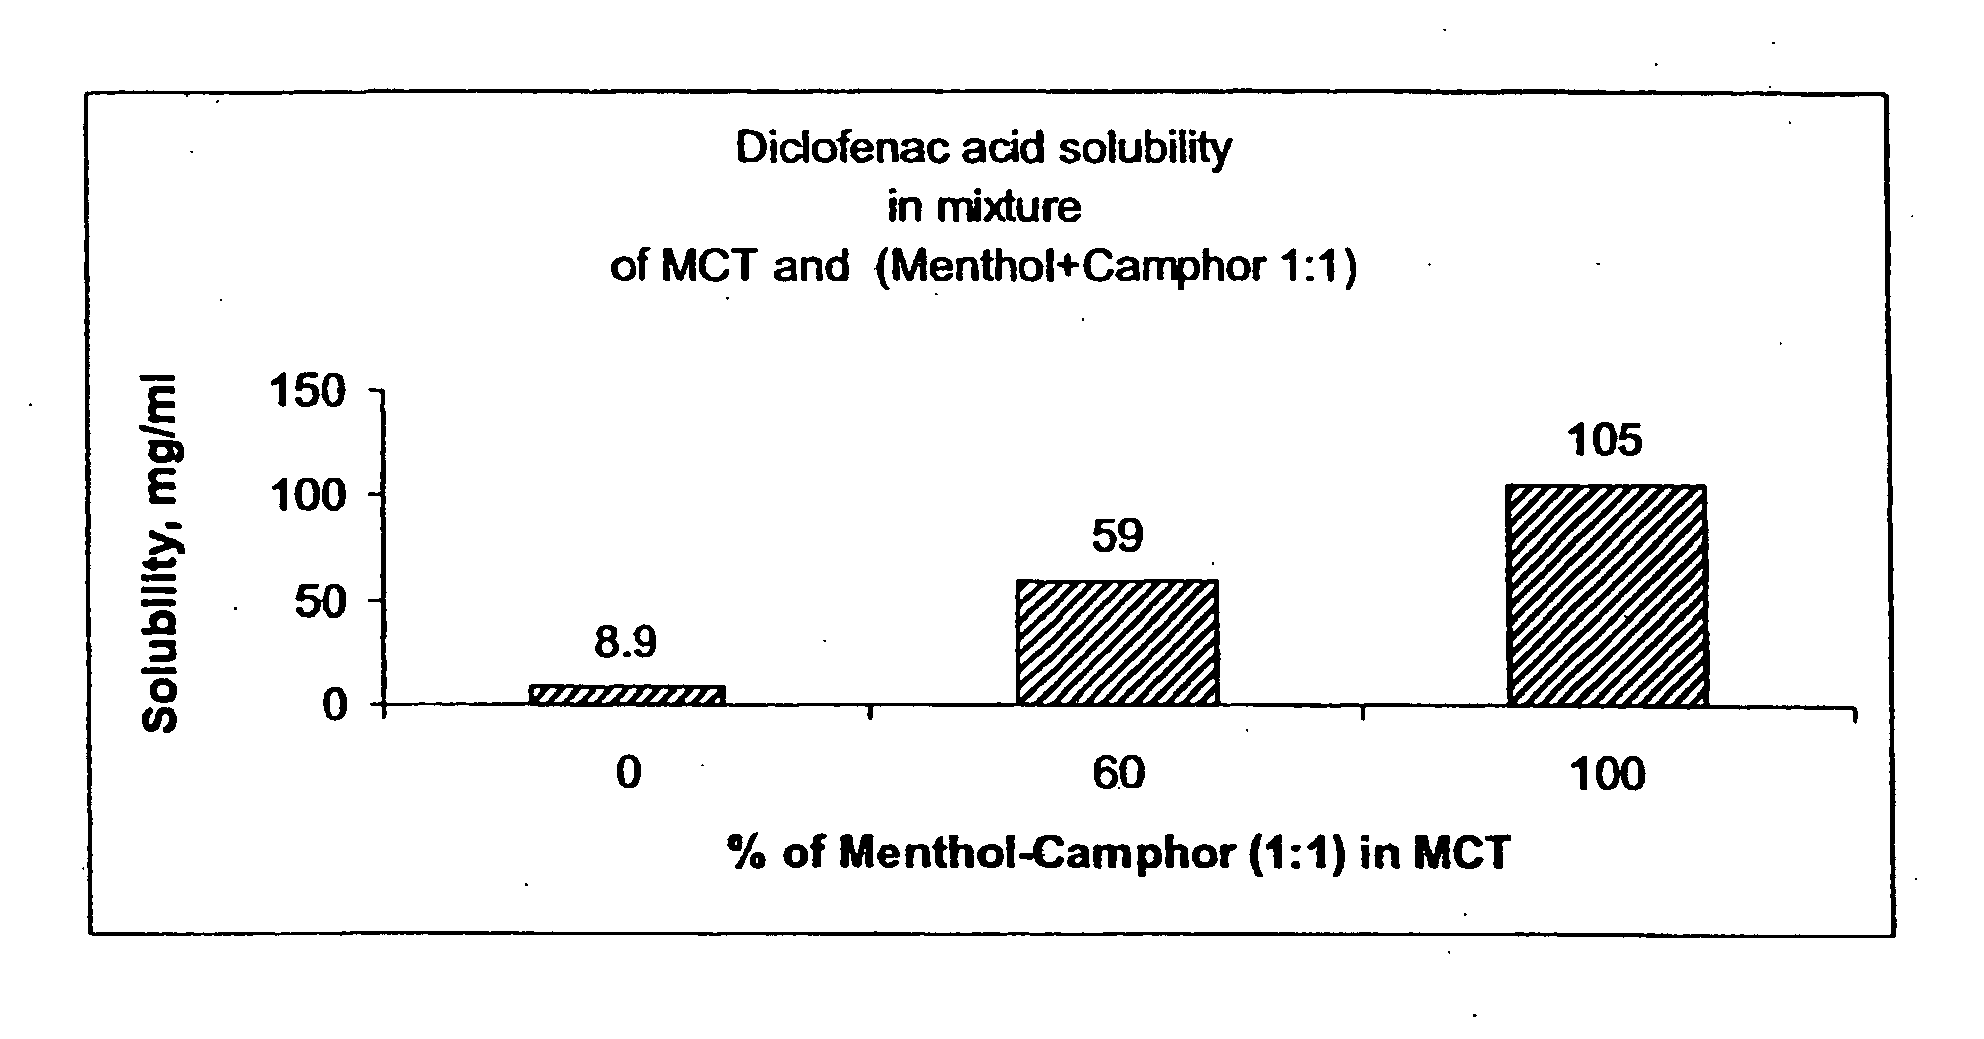 Vehicle for topical delivery of anti-inflammatory compounds